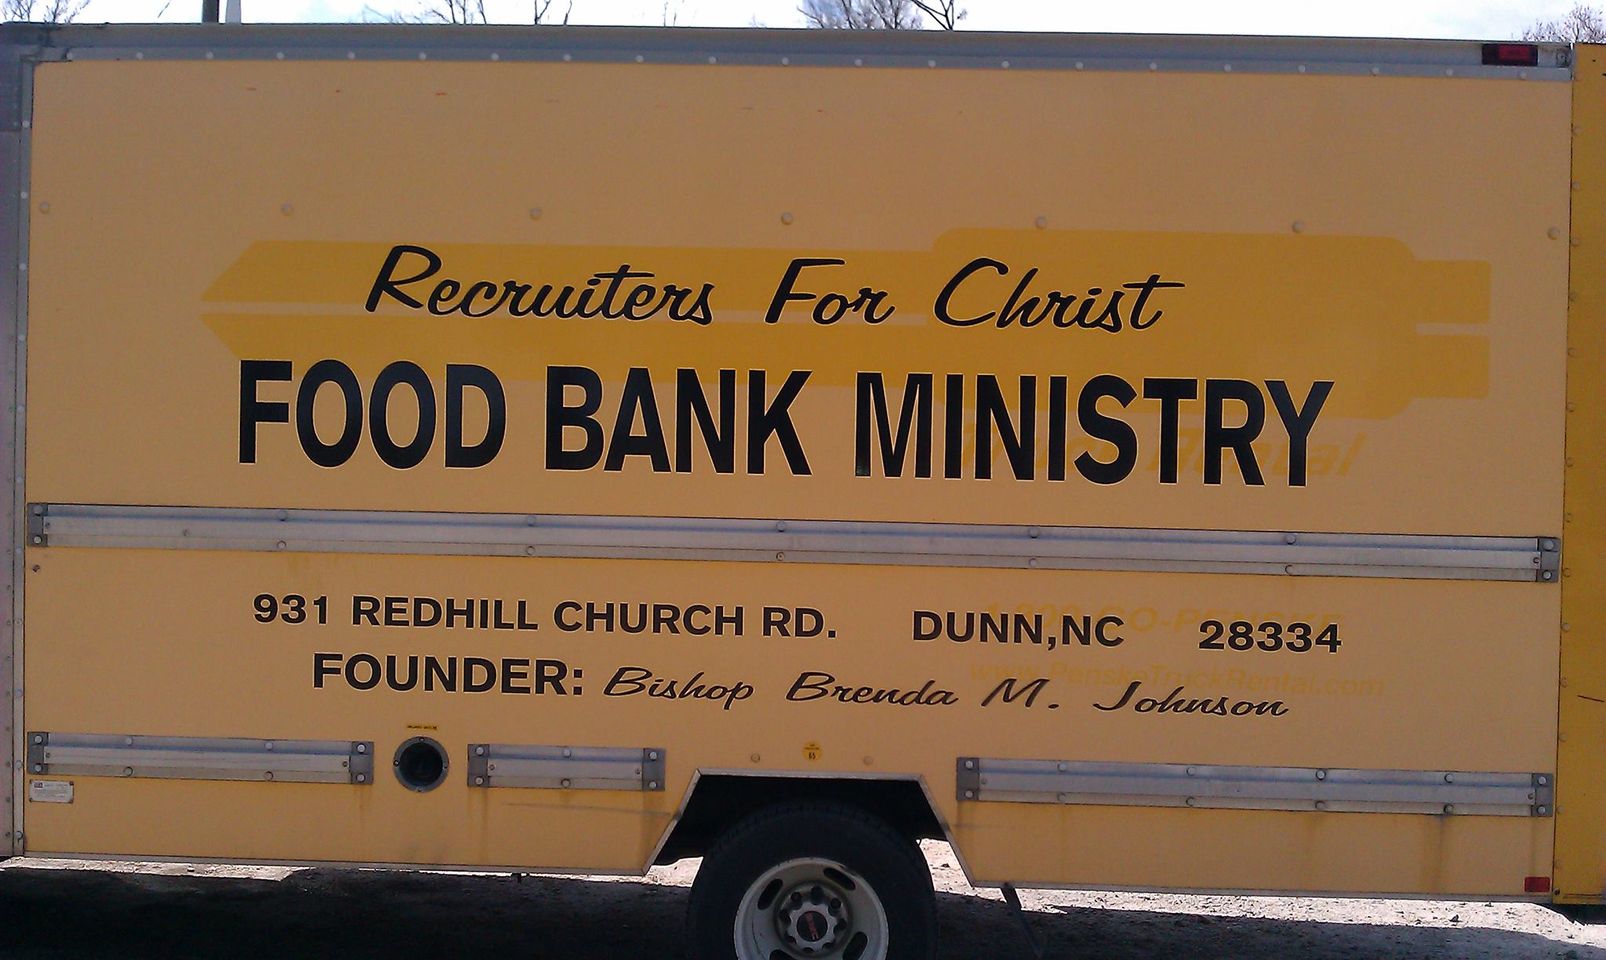 Recruiters for Christ Church Food Pantry